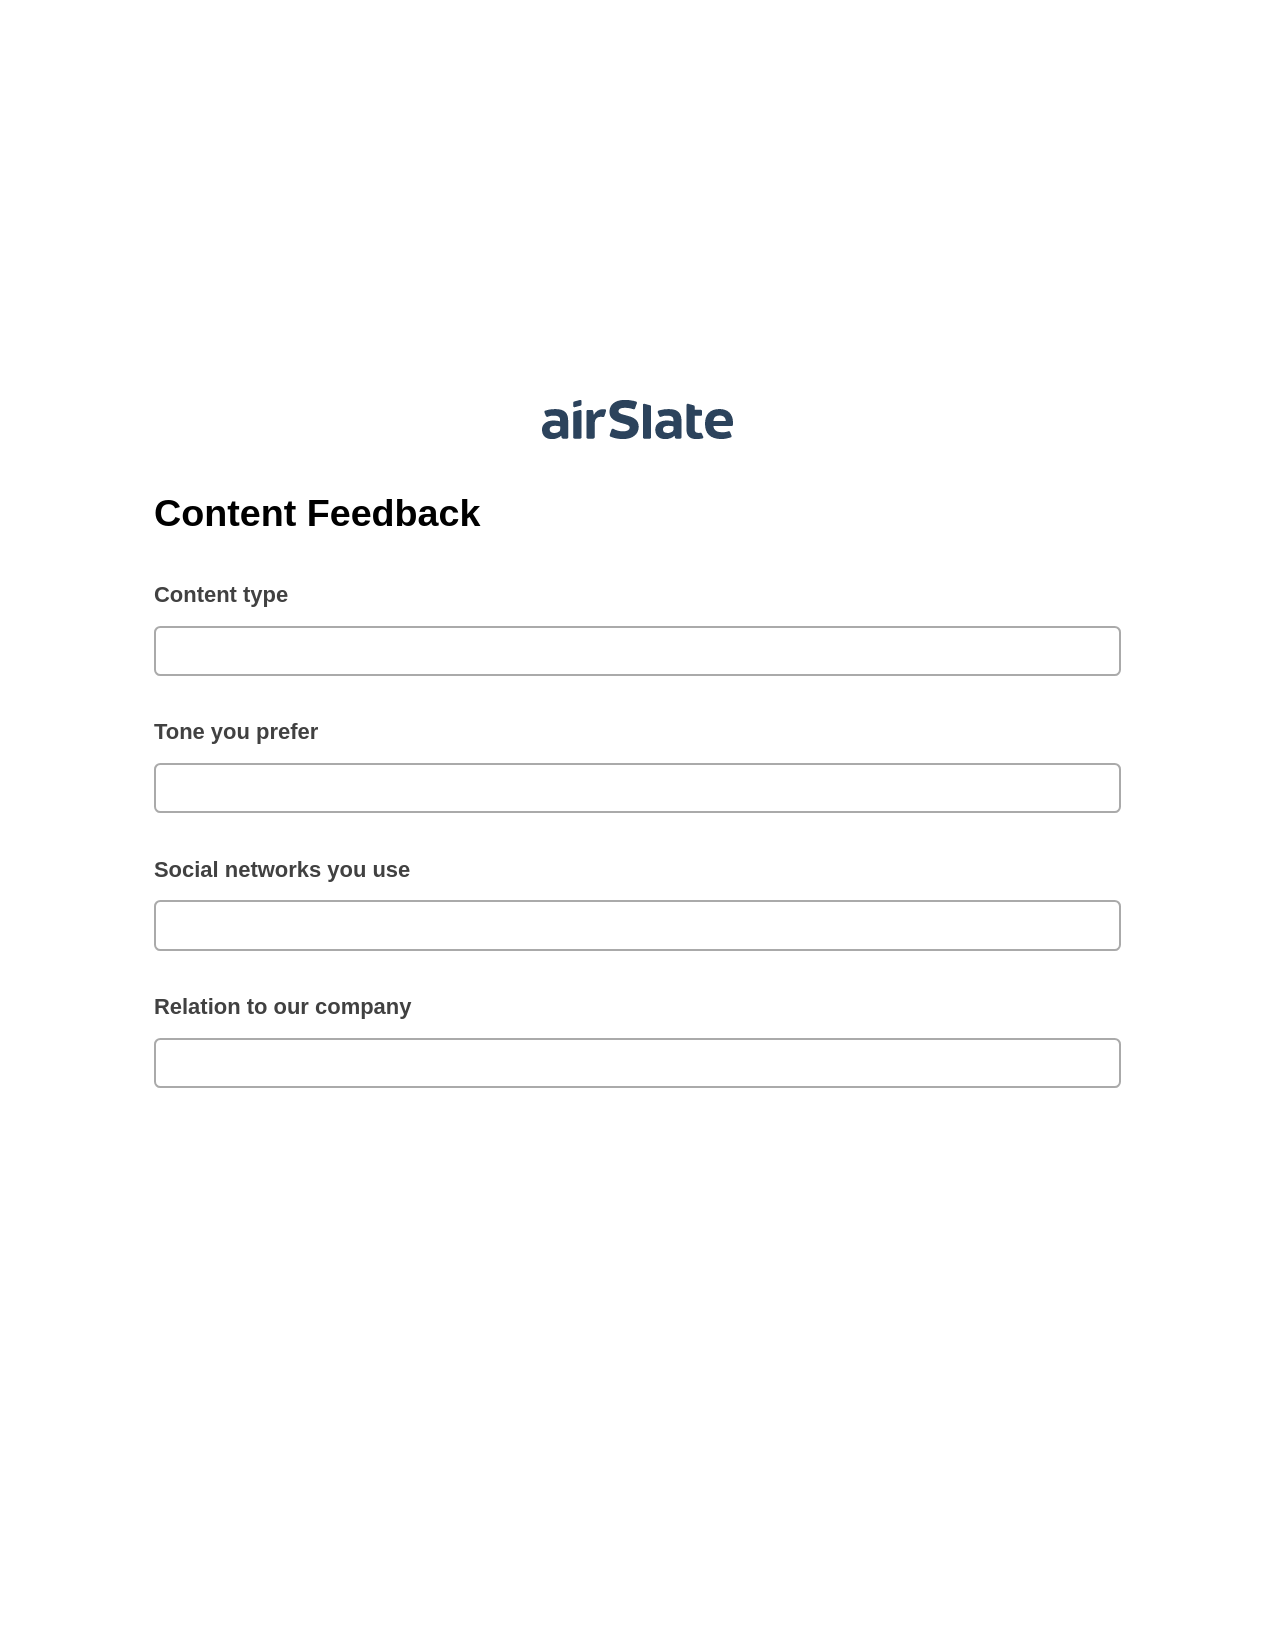 Content Feedback Pre-fill Dropdown from Airtable, Add Tags to Slate Bot, Export to Google Sheet Bot